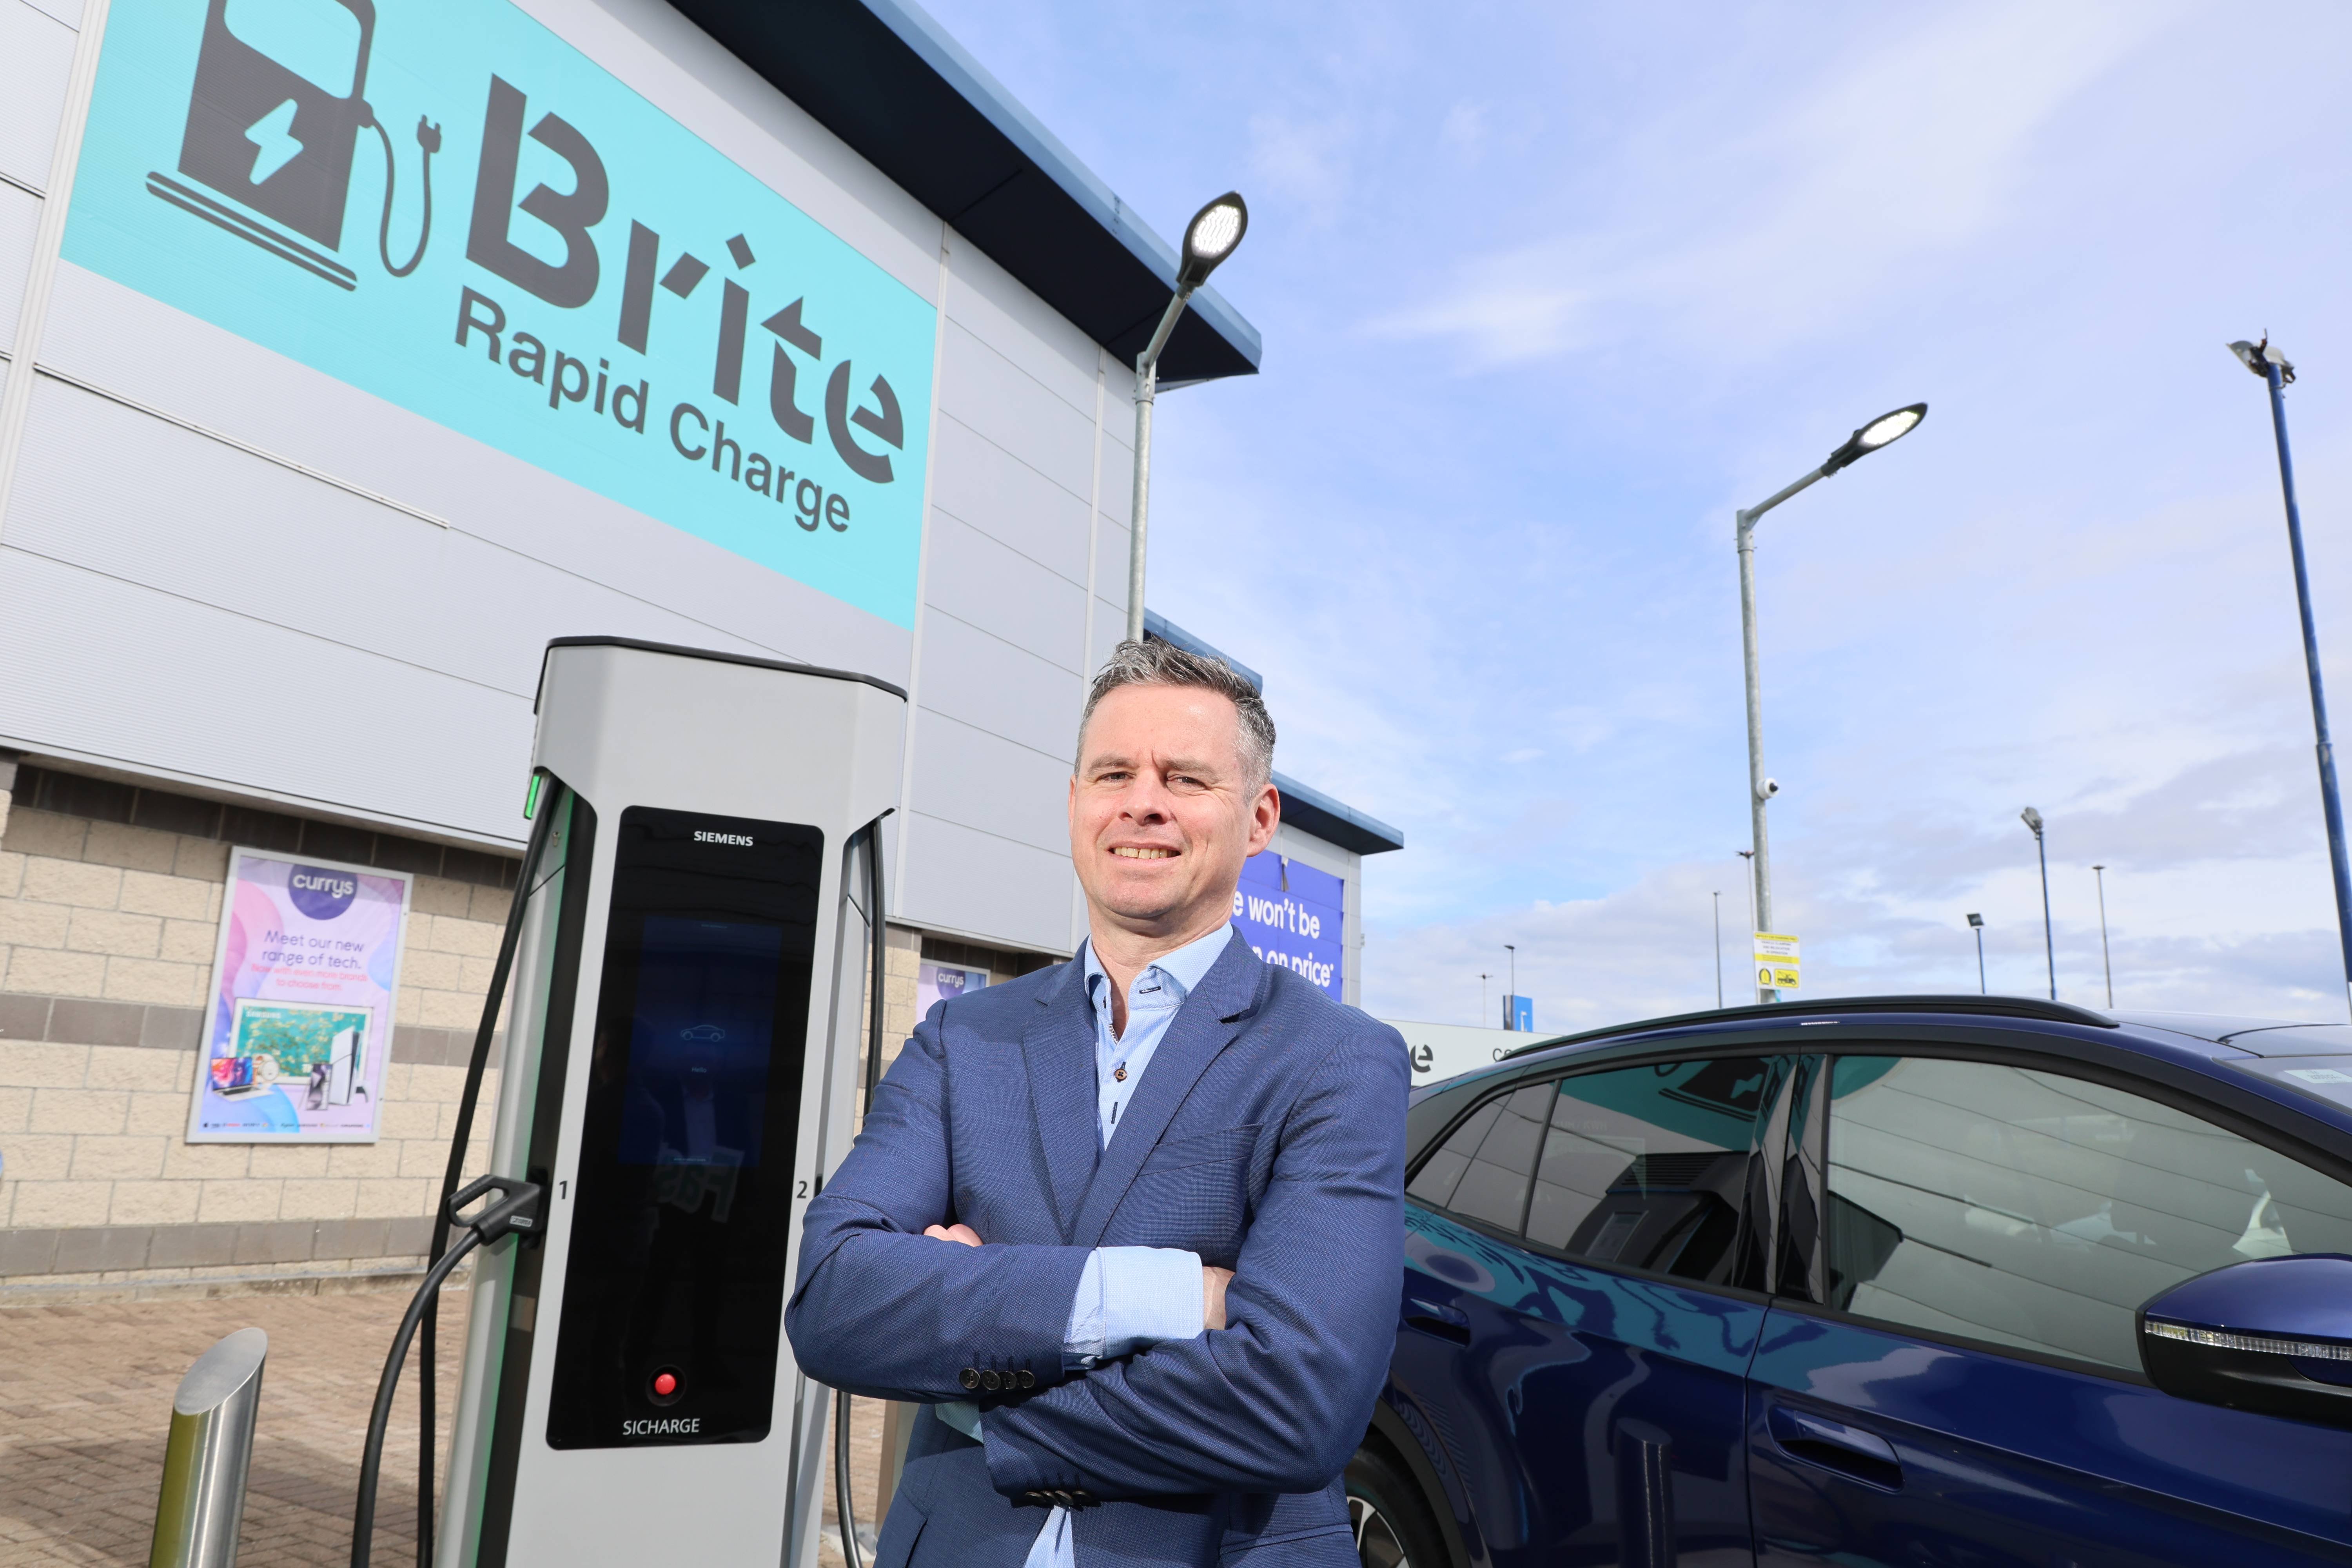 Brite Rapid charge launch 1